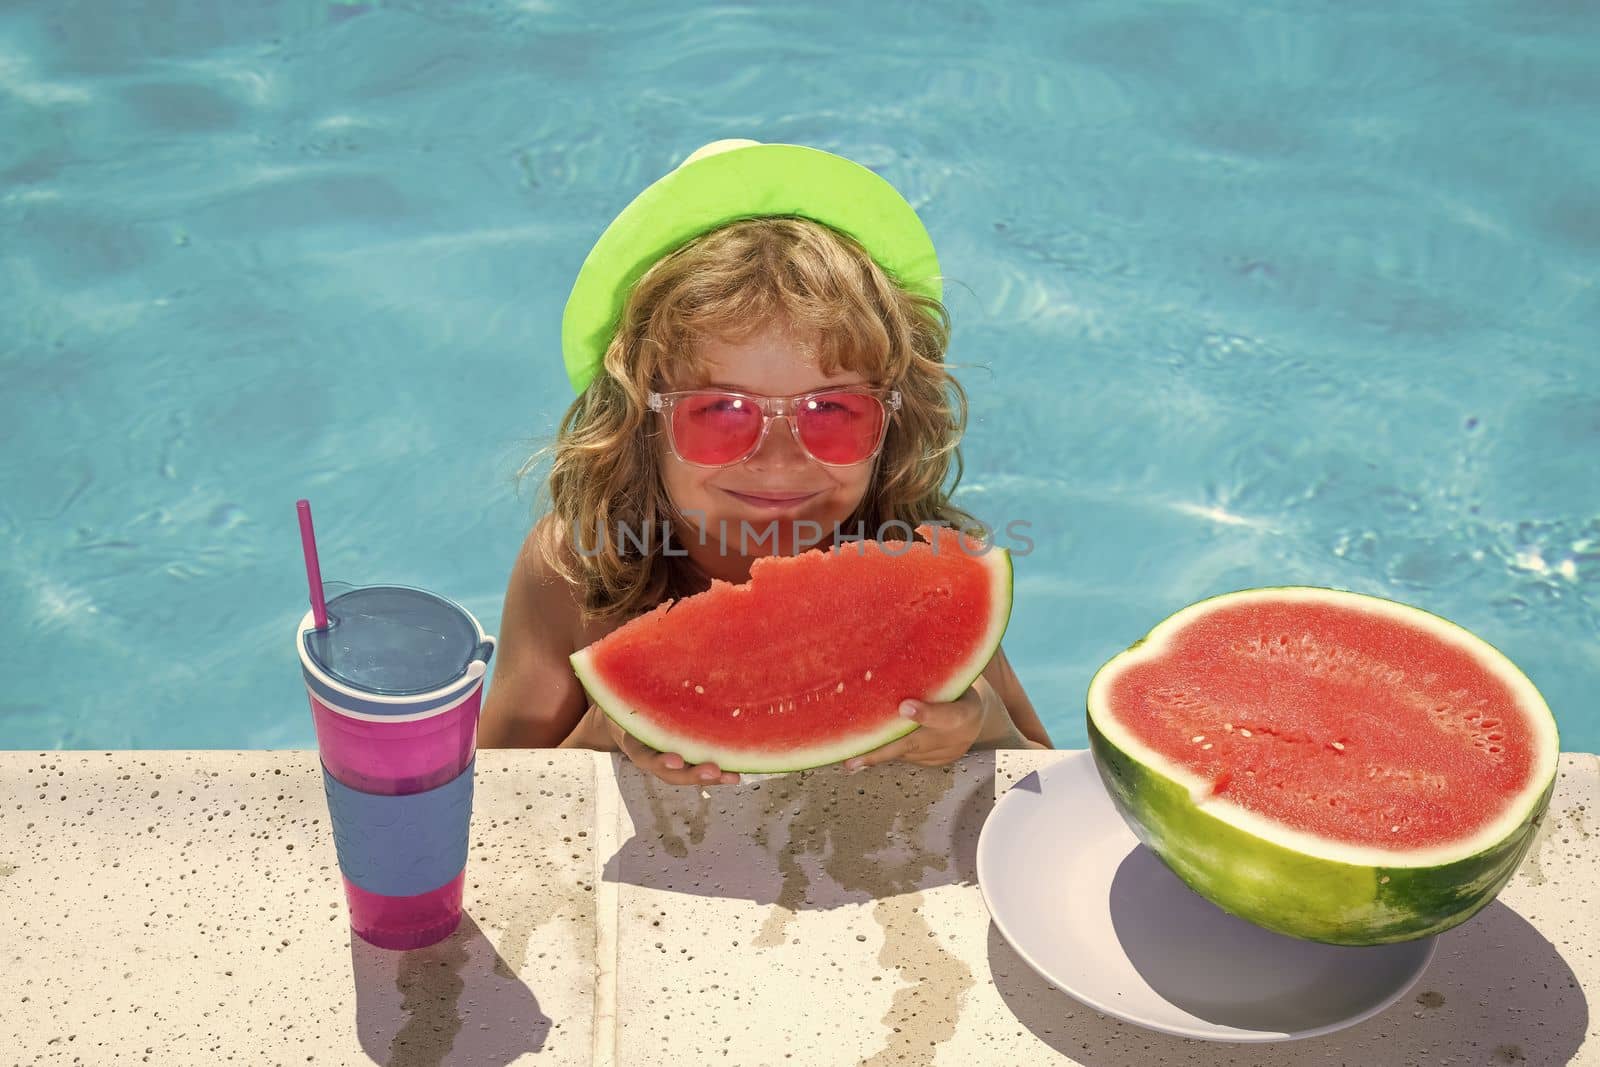 Kid boy eat watermelon in swimming pool. Summer vacation concept. Summer kids portrait with watermelon in pool water